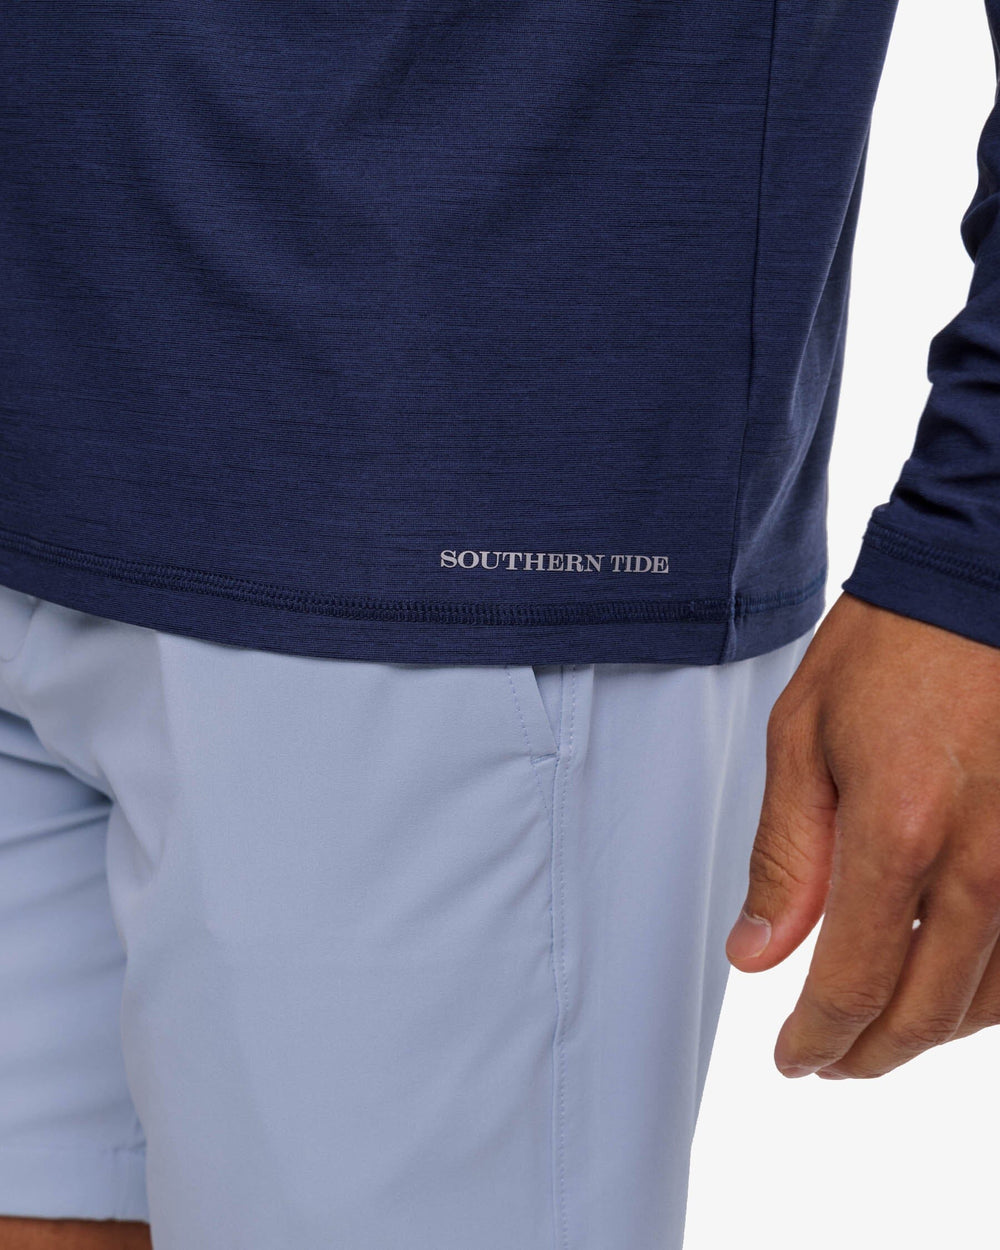 The label view of the Southern Tide brrr-illiant Performance Long Sleeve Tee by Southern Tide - Nautical Navy